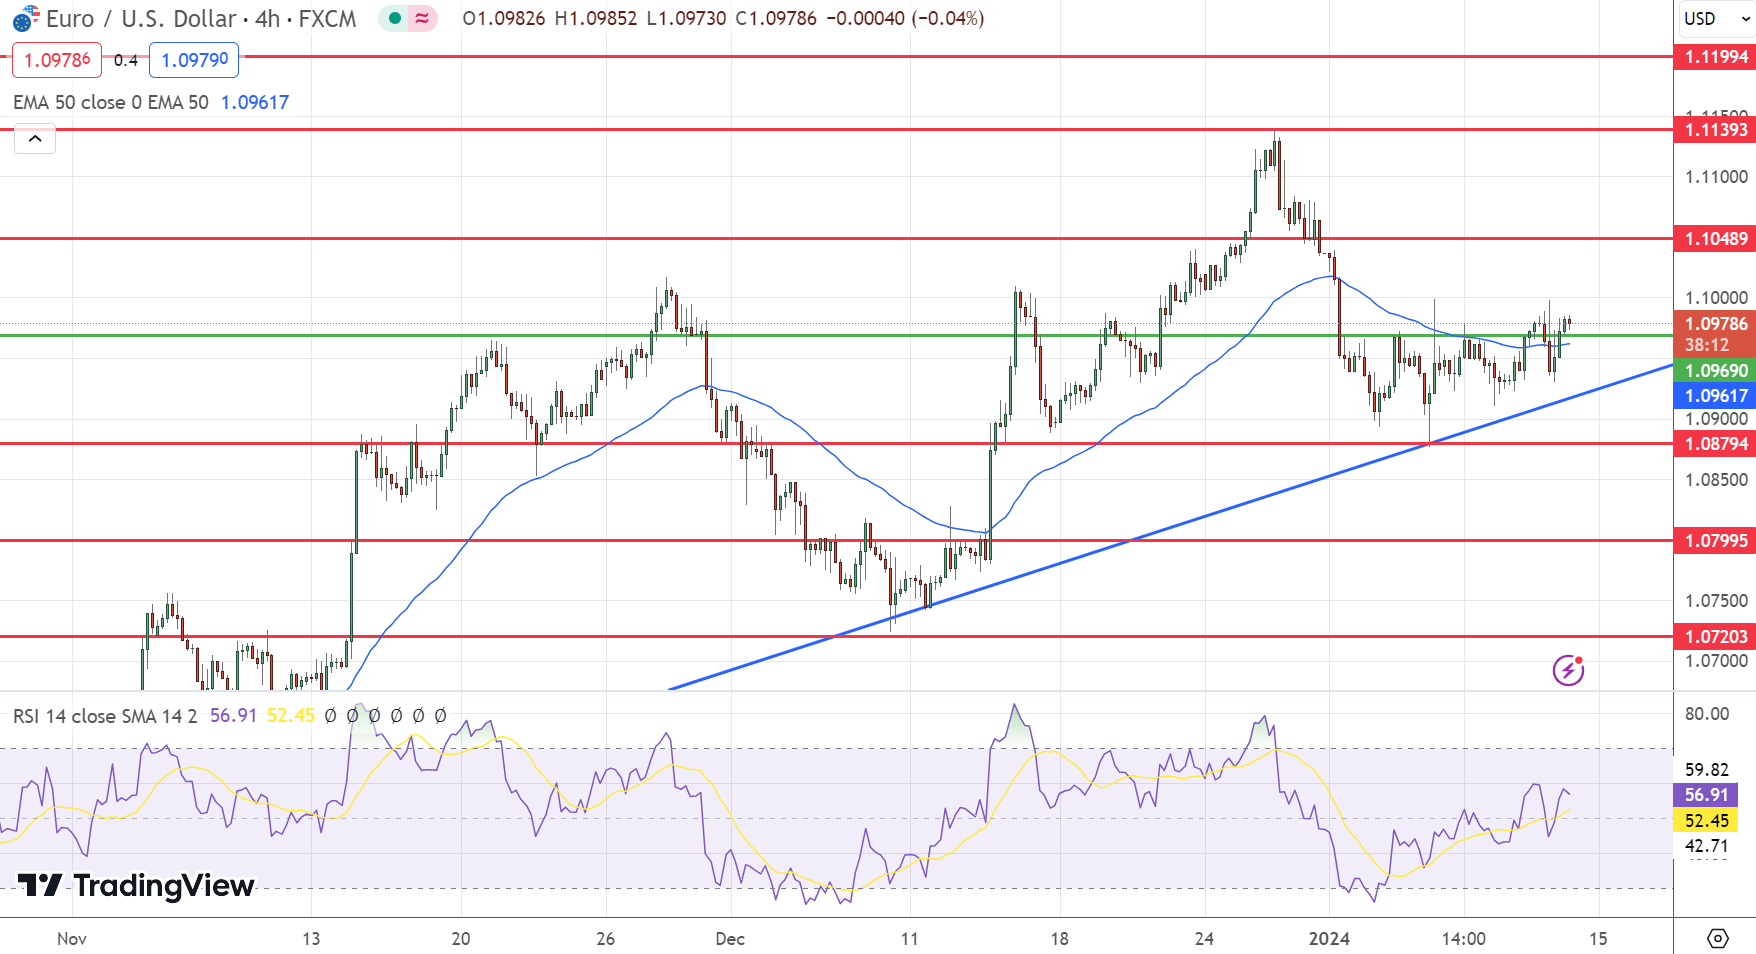 EUR/USD Stability Amid Mixed Economic Signals and Market Speculations